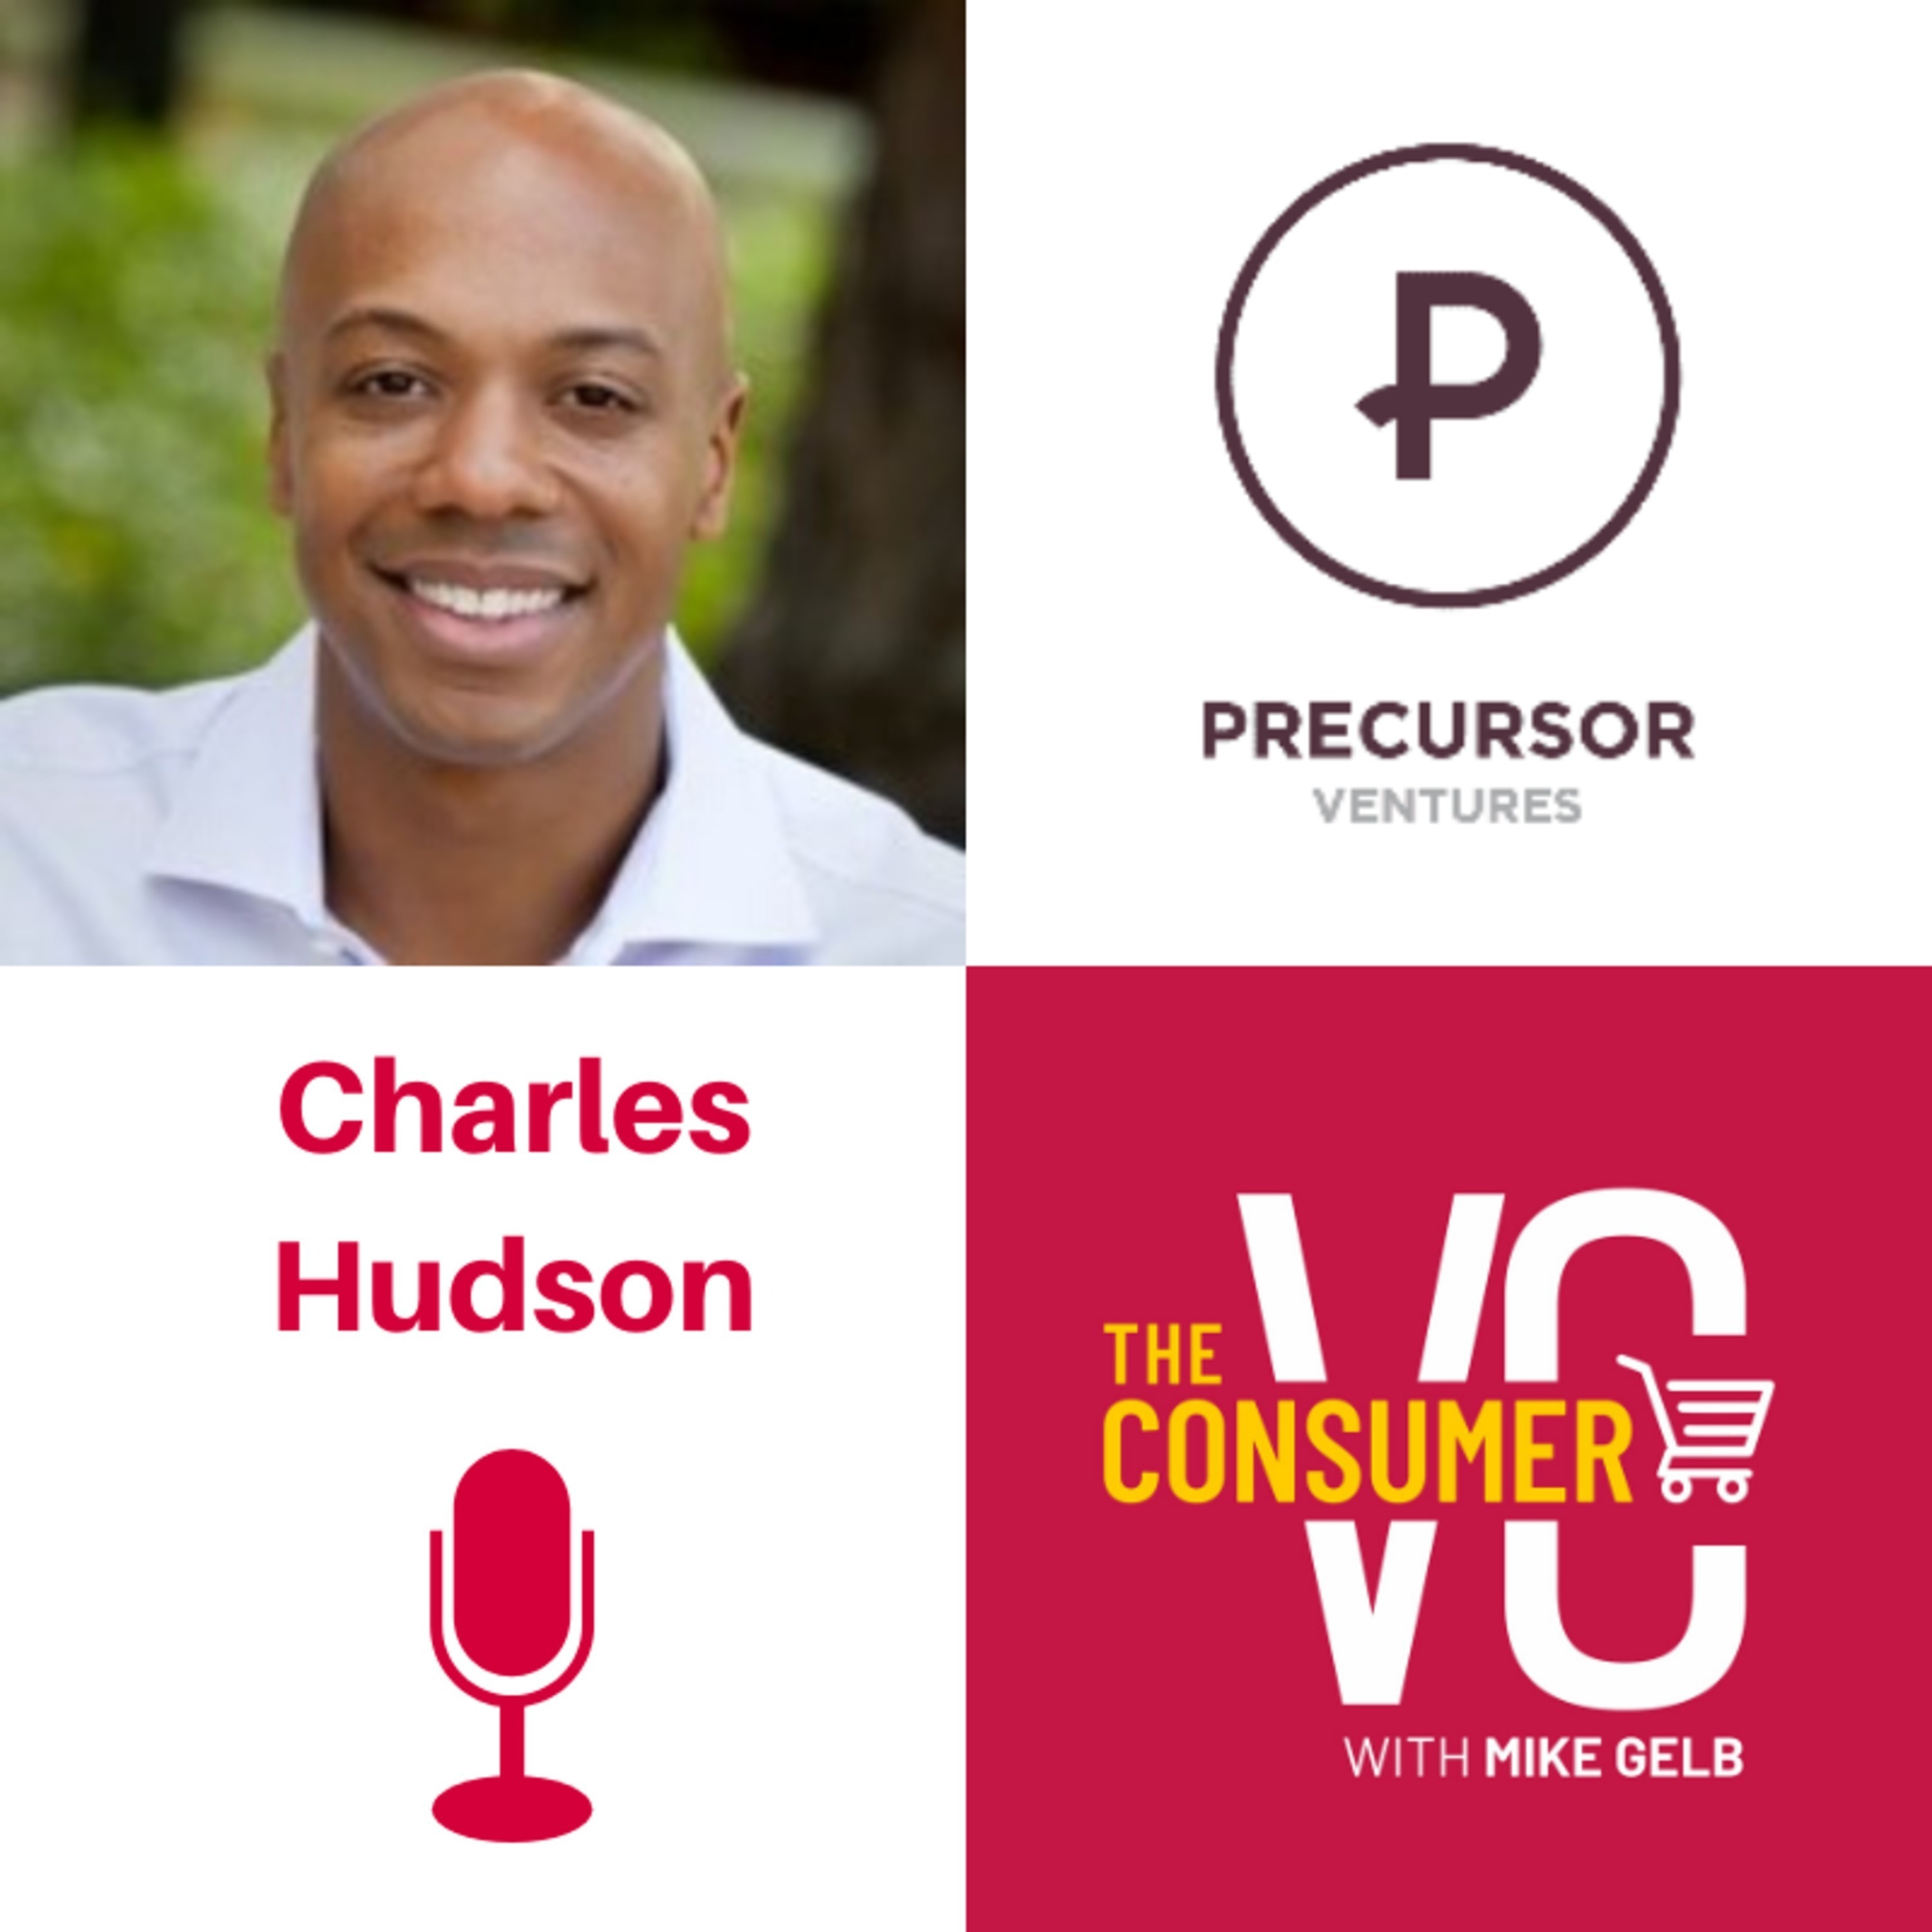 Charles Hudson (Precursor Ventures) - The State of Seed Investing, The Early Stage Ecosystem, and Why Consumer Has Been Out Of Favor with VCs Image